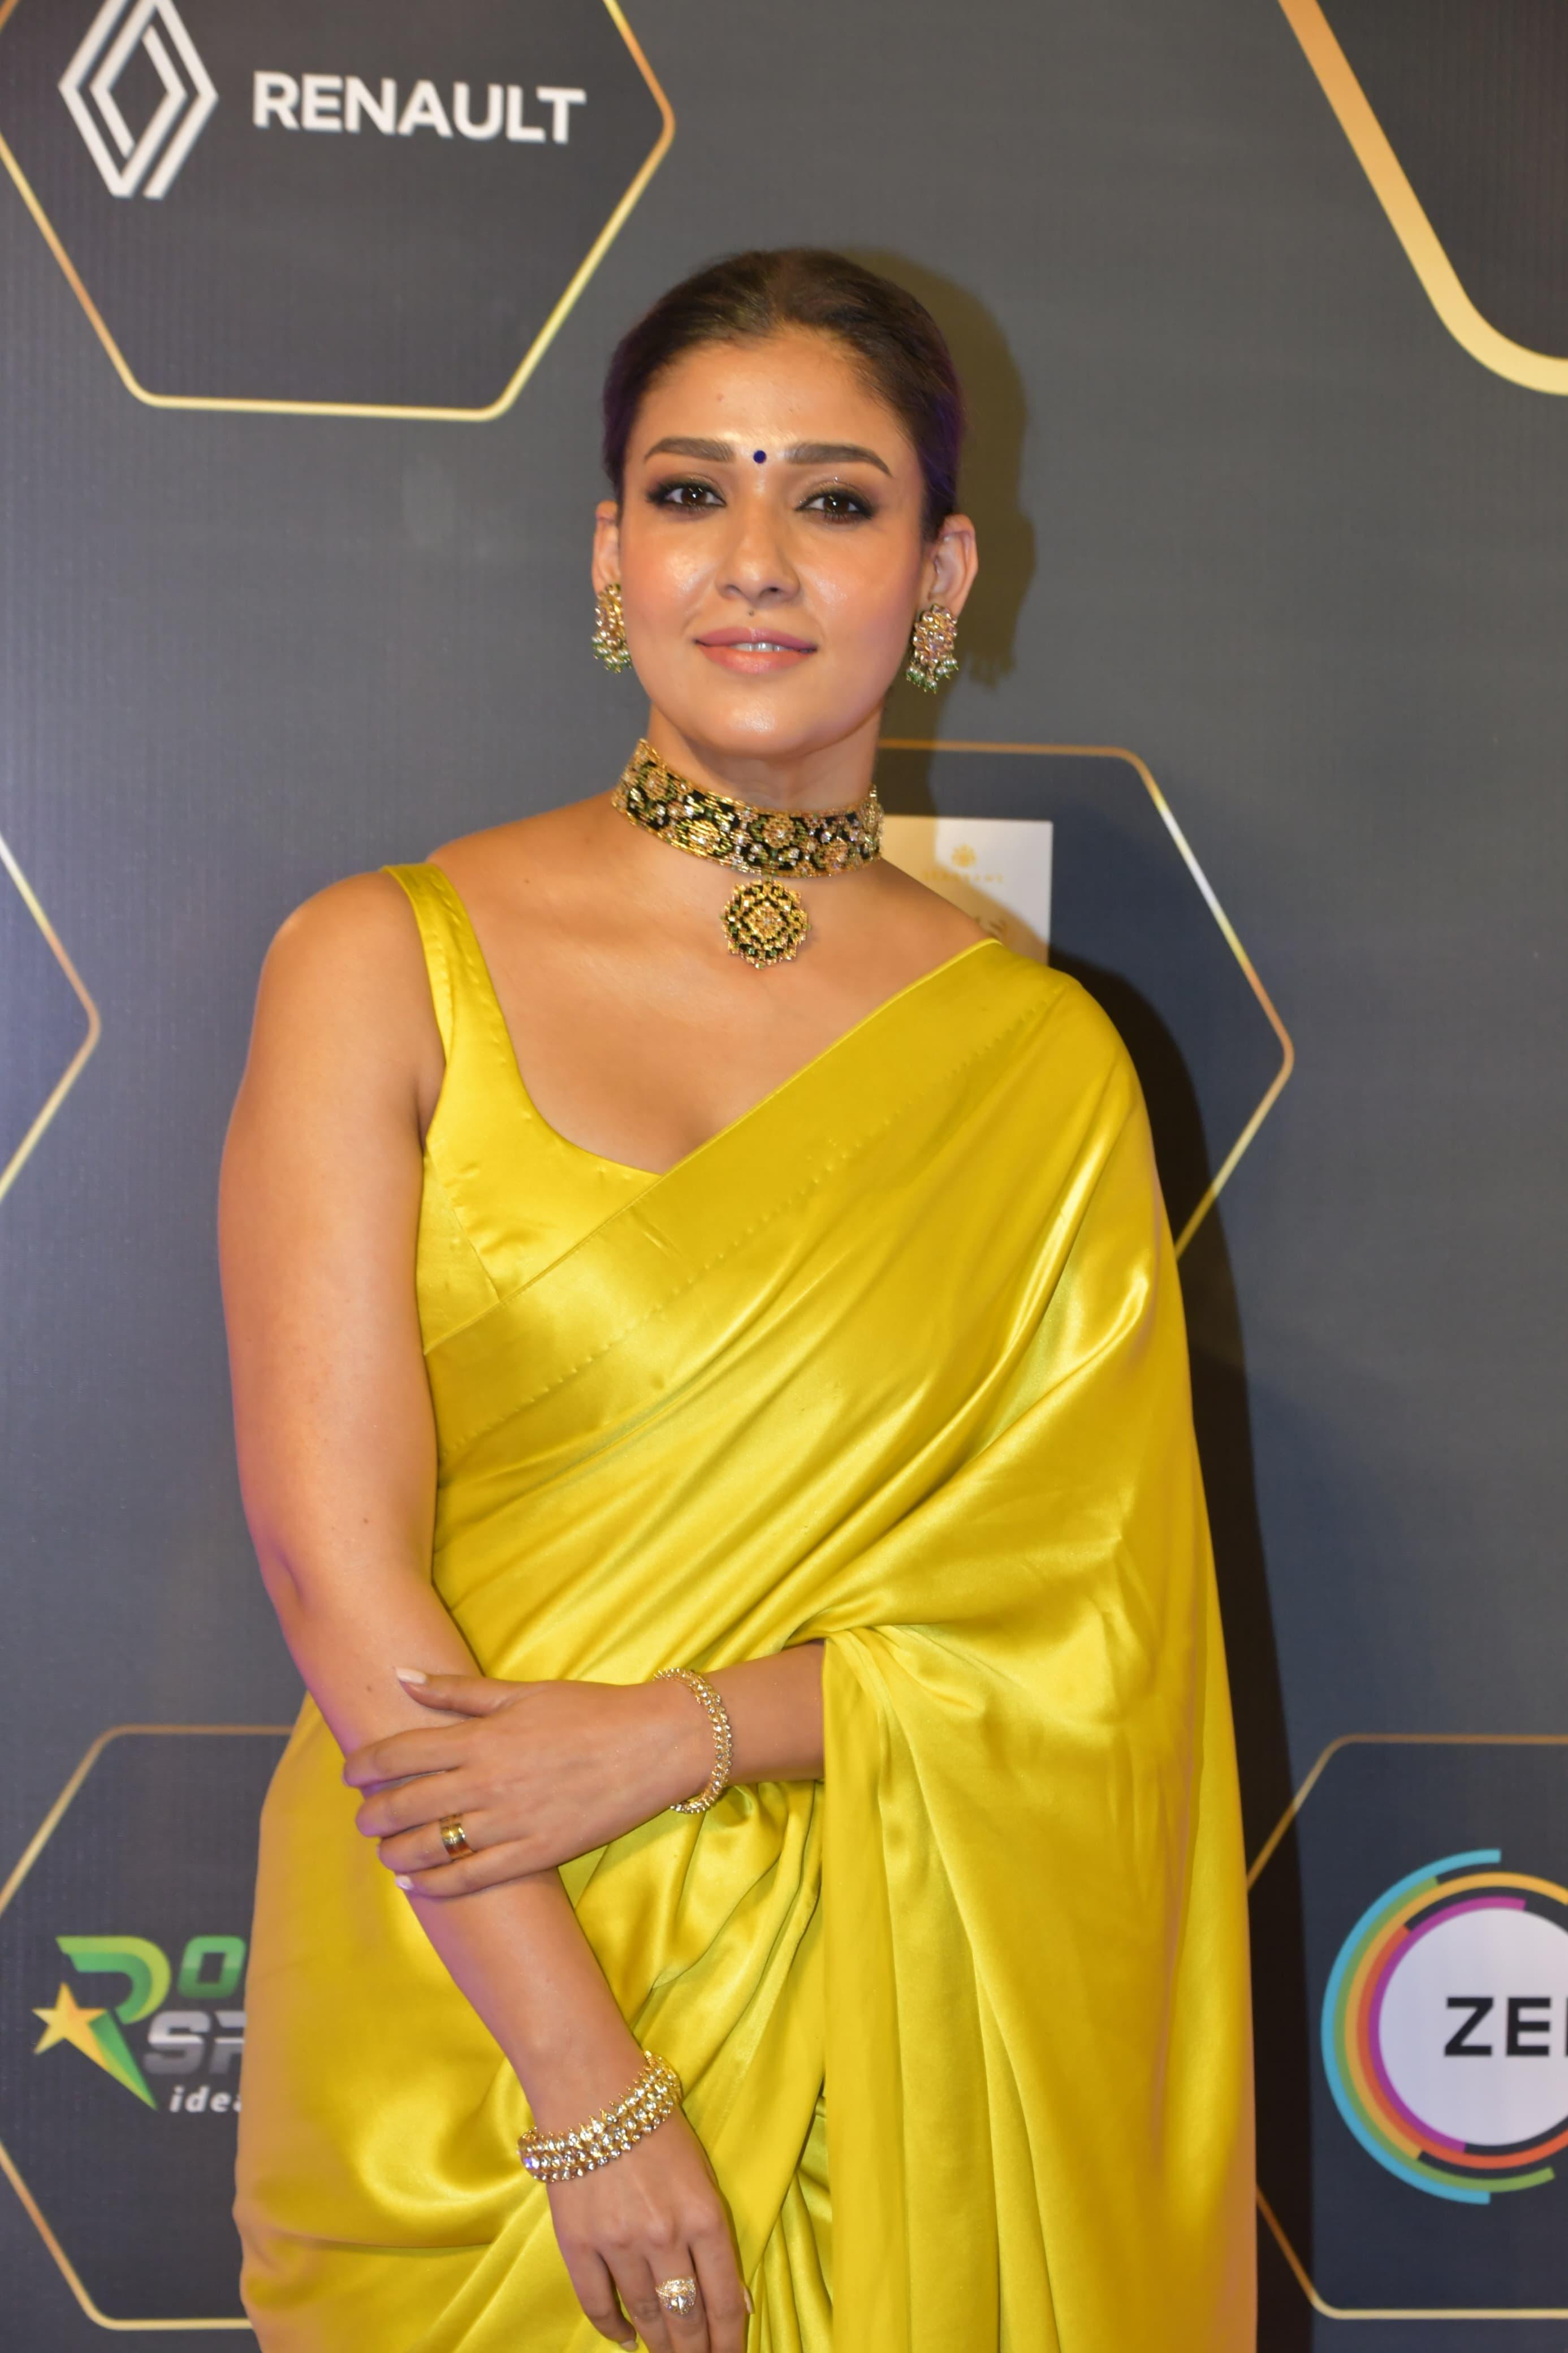 Actress Nayanthara stunned in a lemon yellow saree at the awards show. She won the Best Actress award for her role in Jawan.